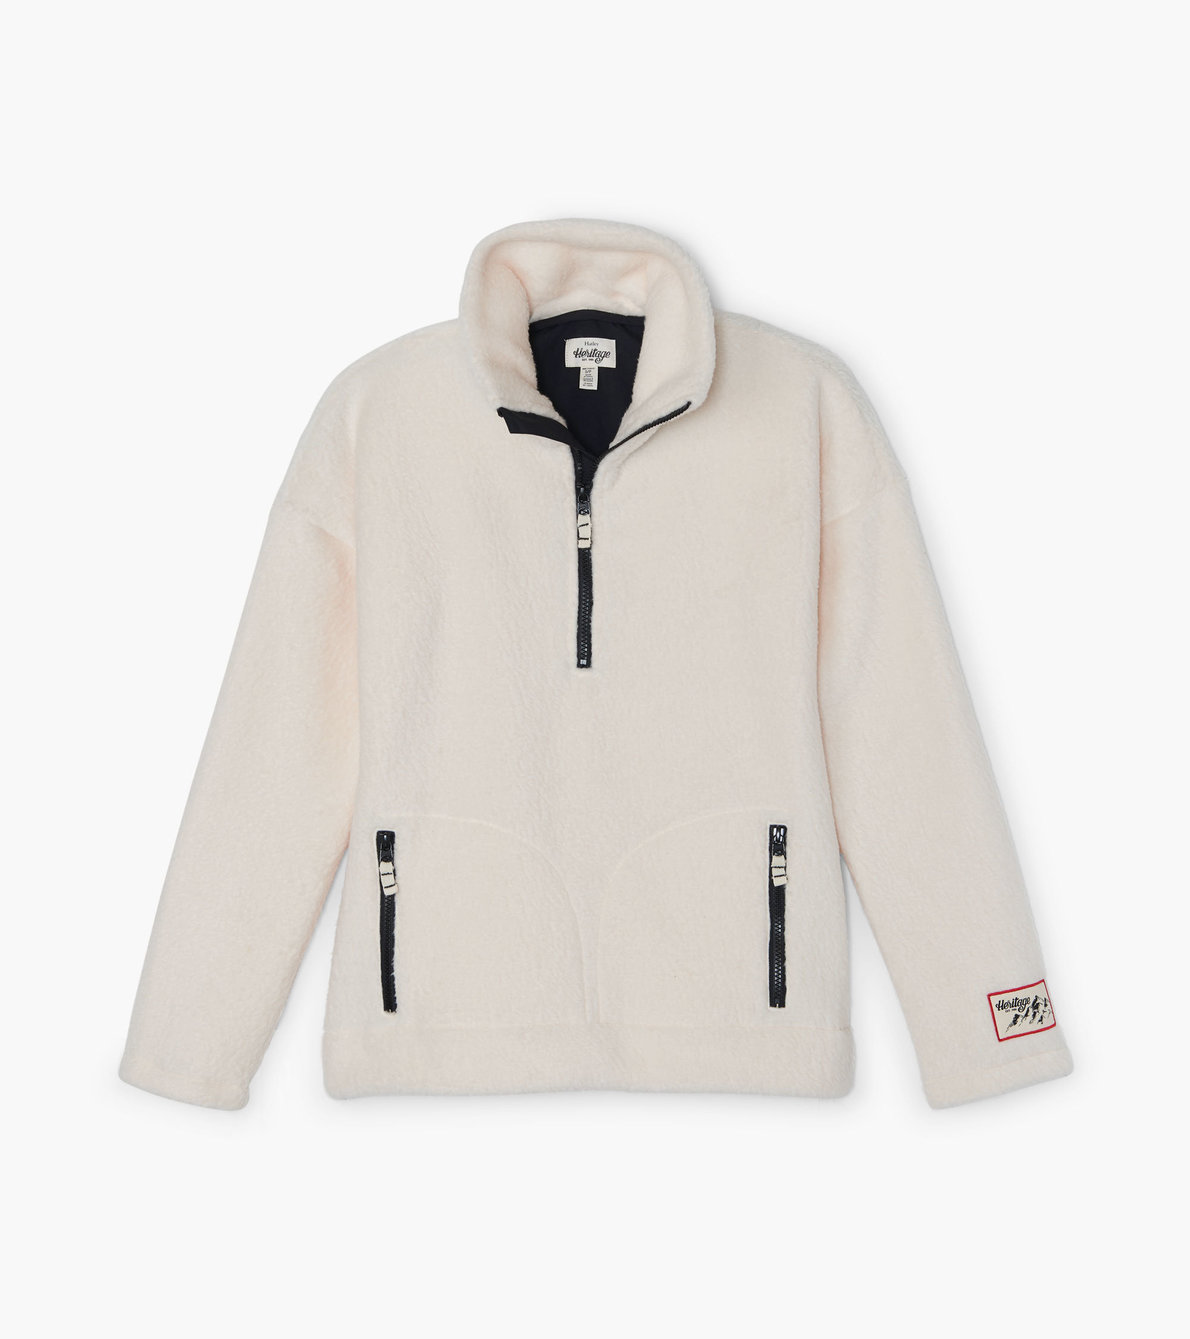 View larger image of Women's Heritage Sherpa Fleece Pullover in Cream